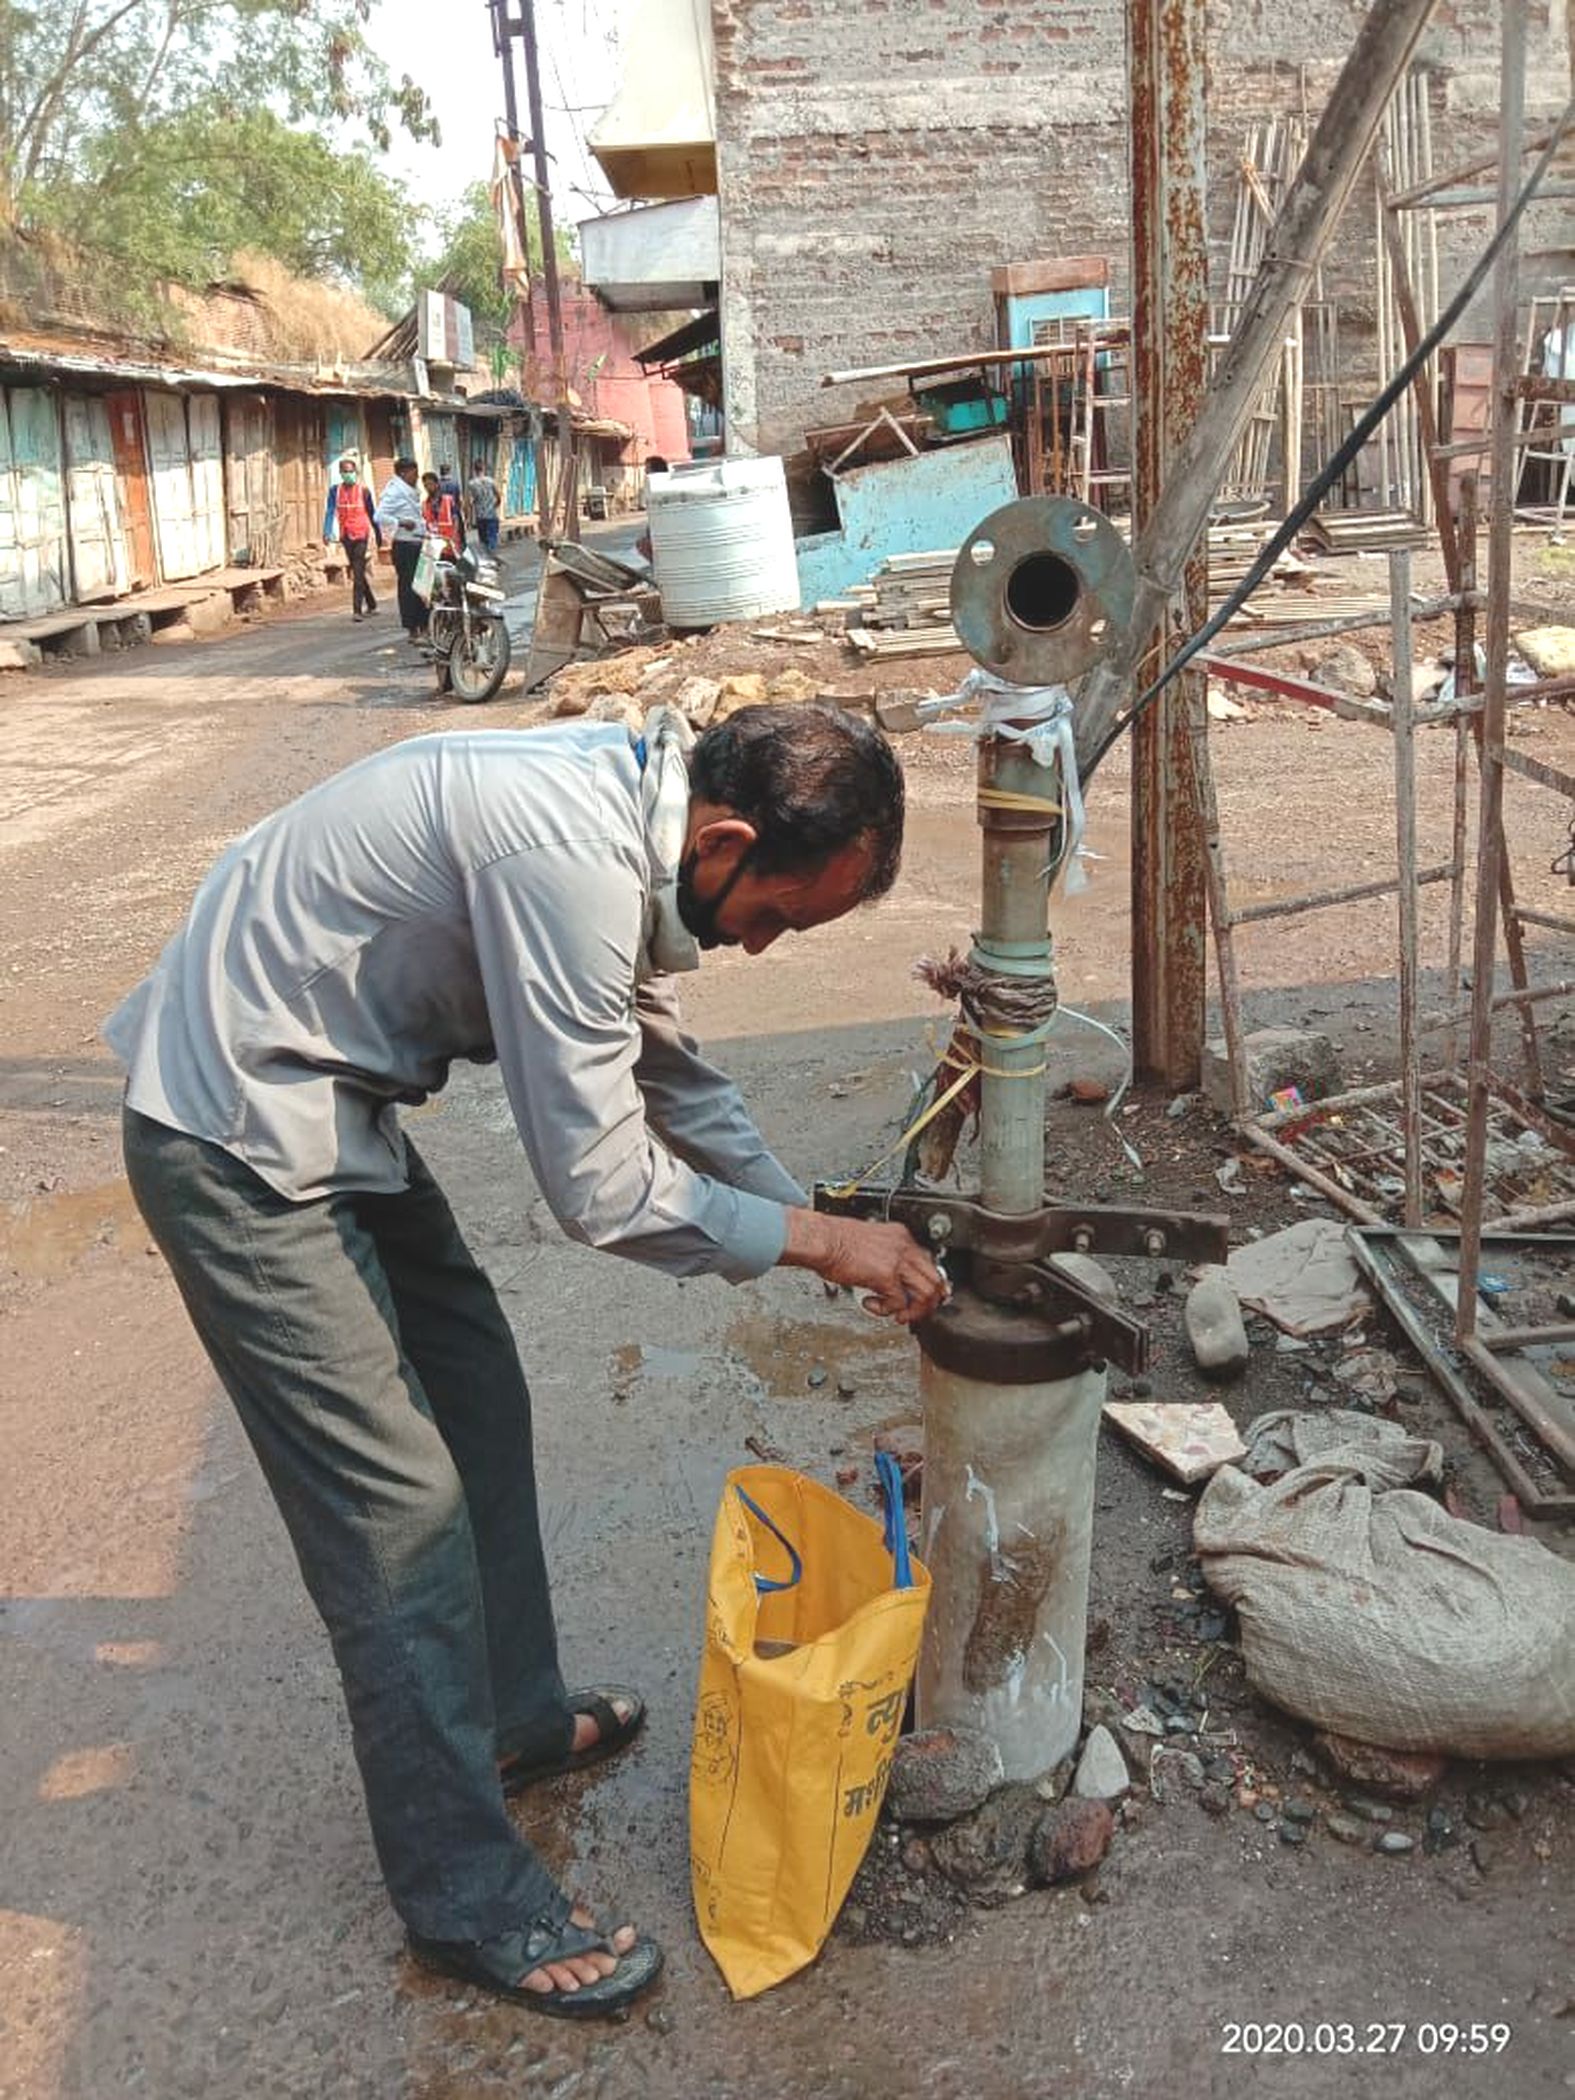 Increased water scarcity in the city